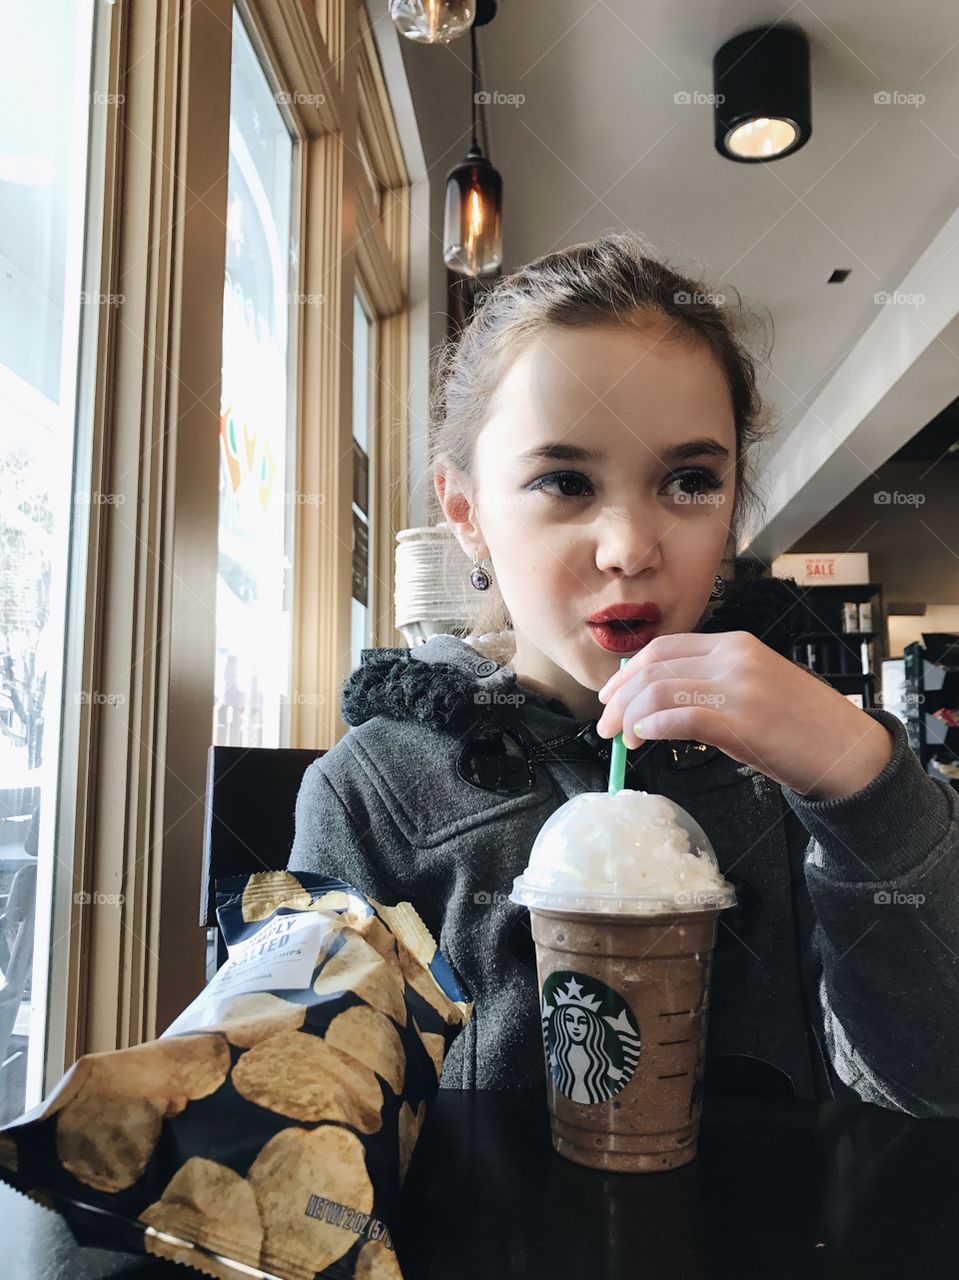 Cute, little girl out on a Starbucks Frappuccino date with her momma in a warm coat by the window. 